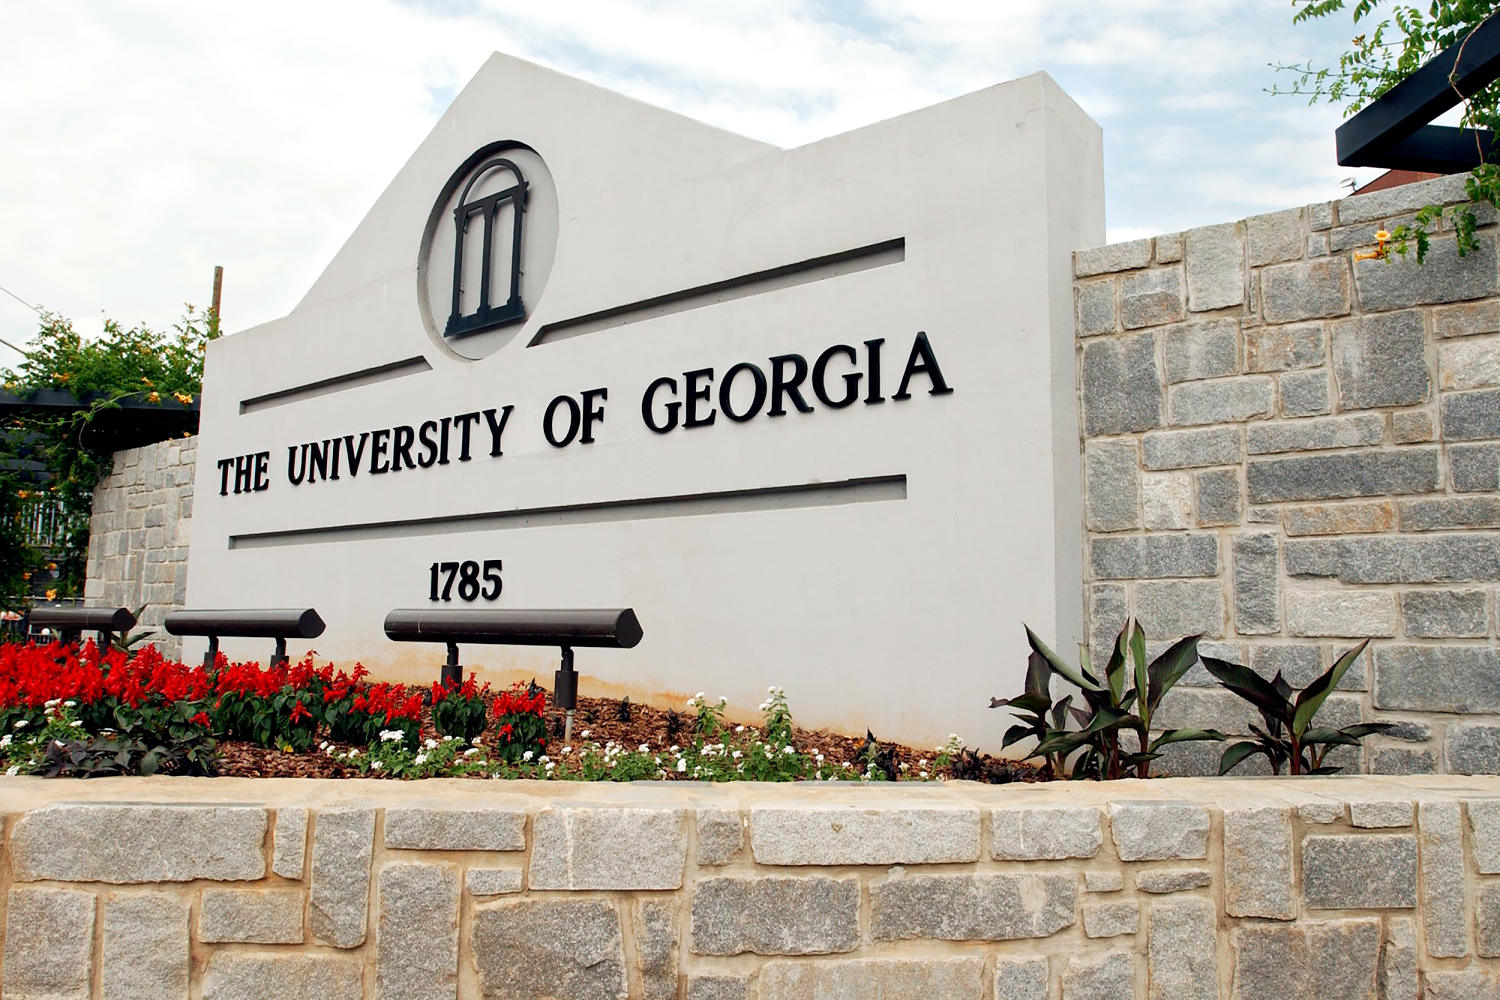 Person of interest questioned after woman found dead on University of Georgia campus